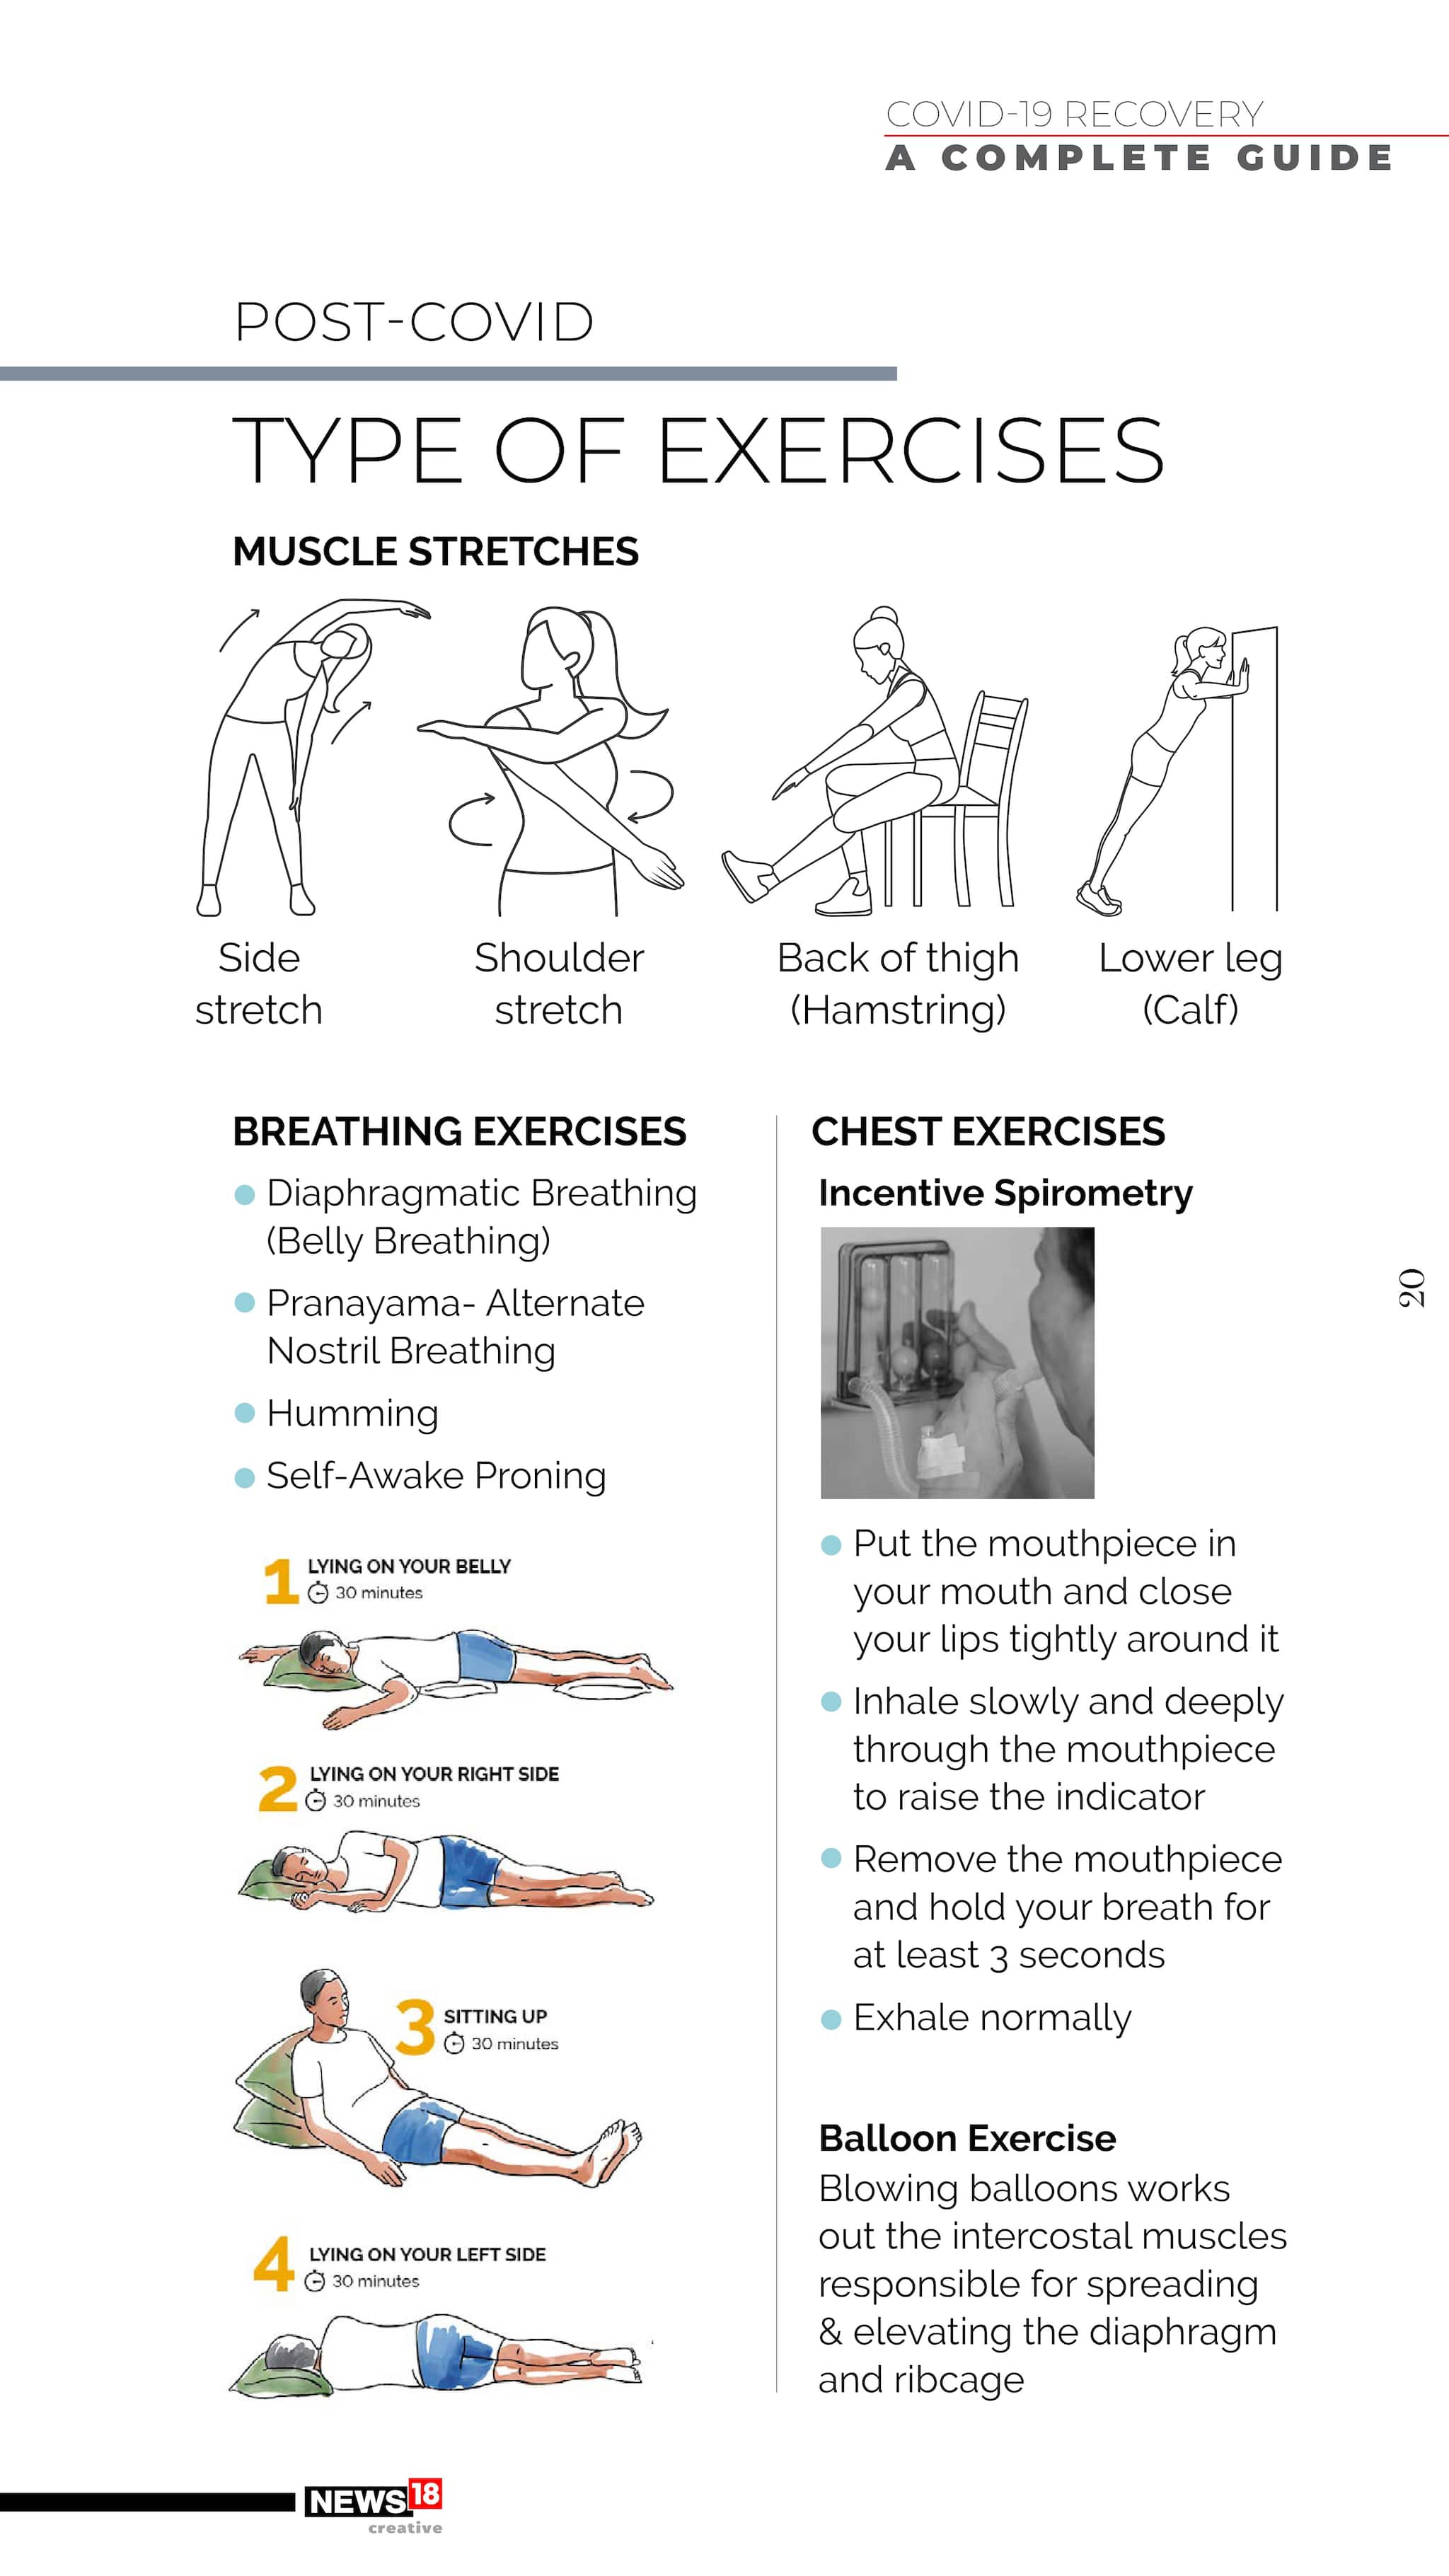 Can covid patient do exercise